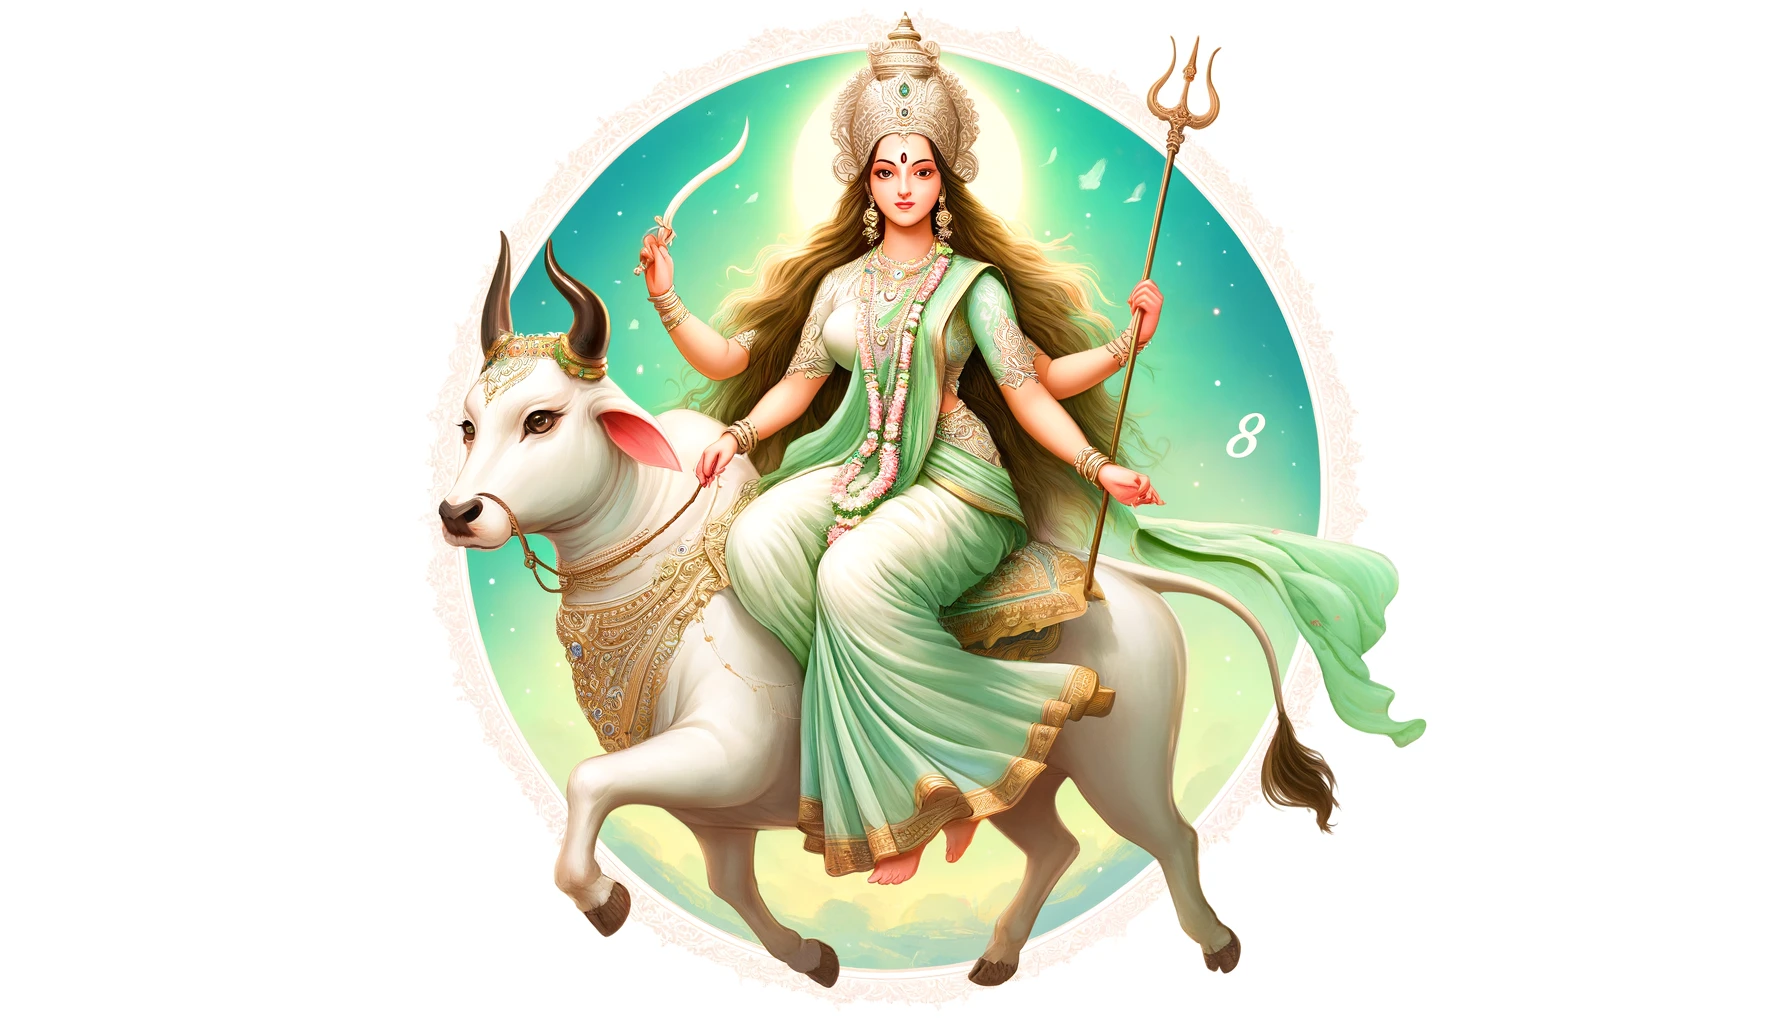 A serene and beautiful illustration of Goddess Mahagauri, the eighth form of Goddess Durga worshipped on the eighth day of Navratri. The image should